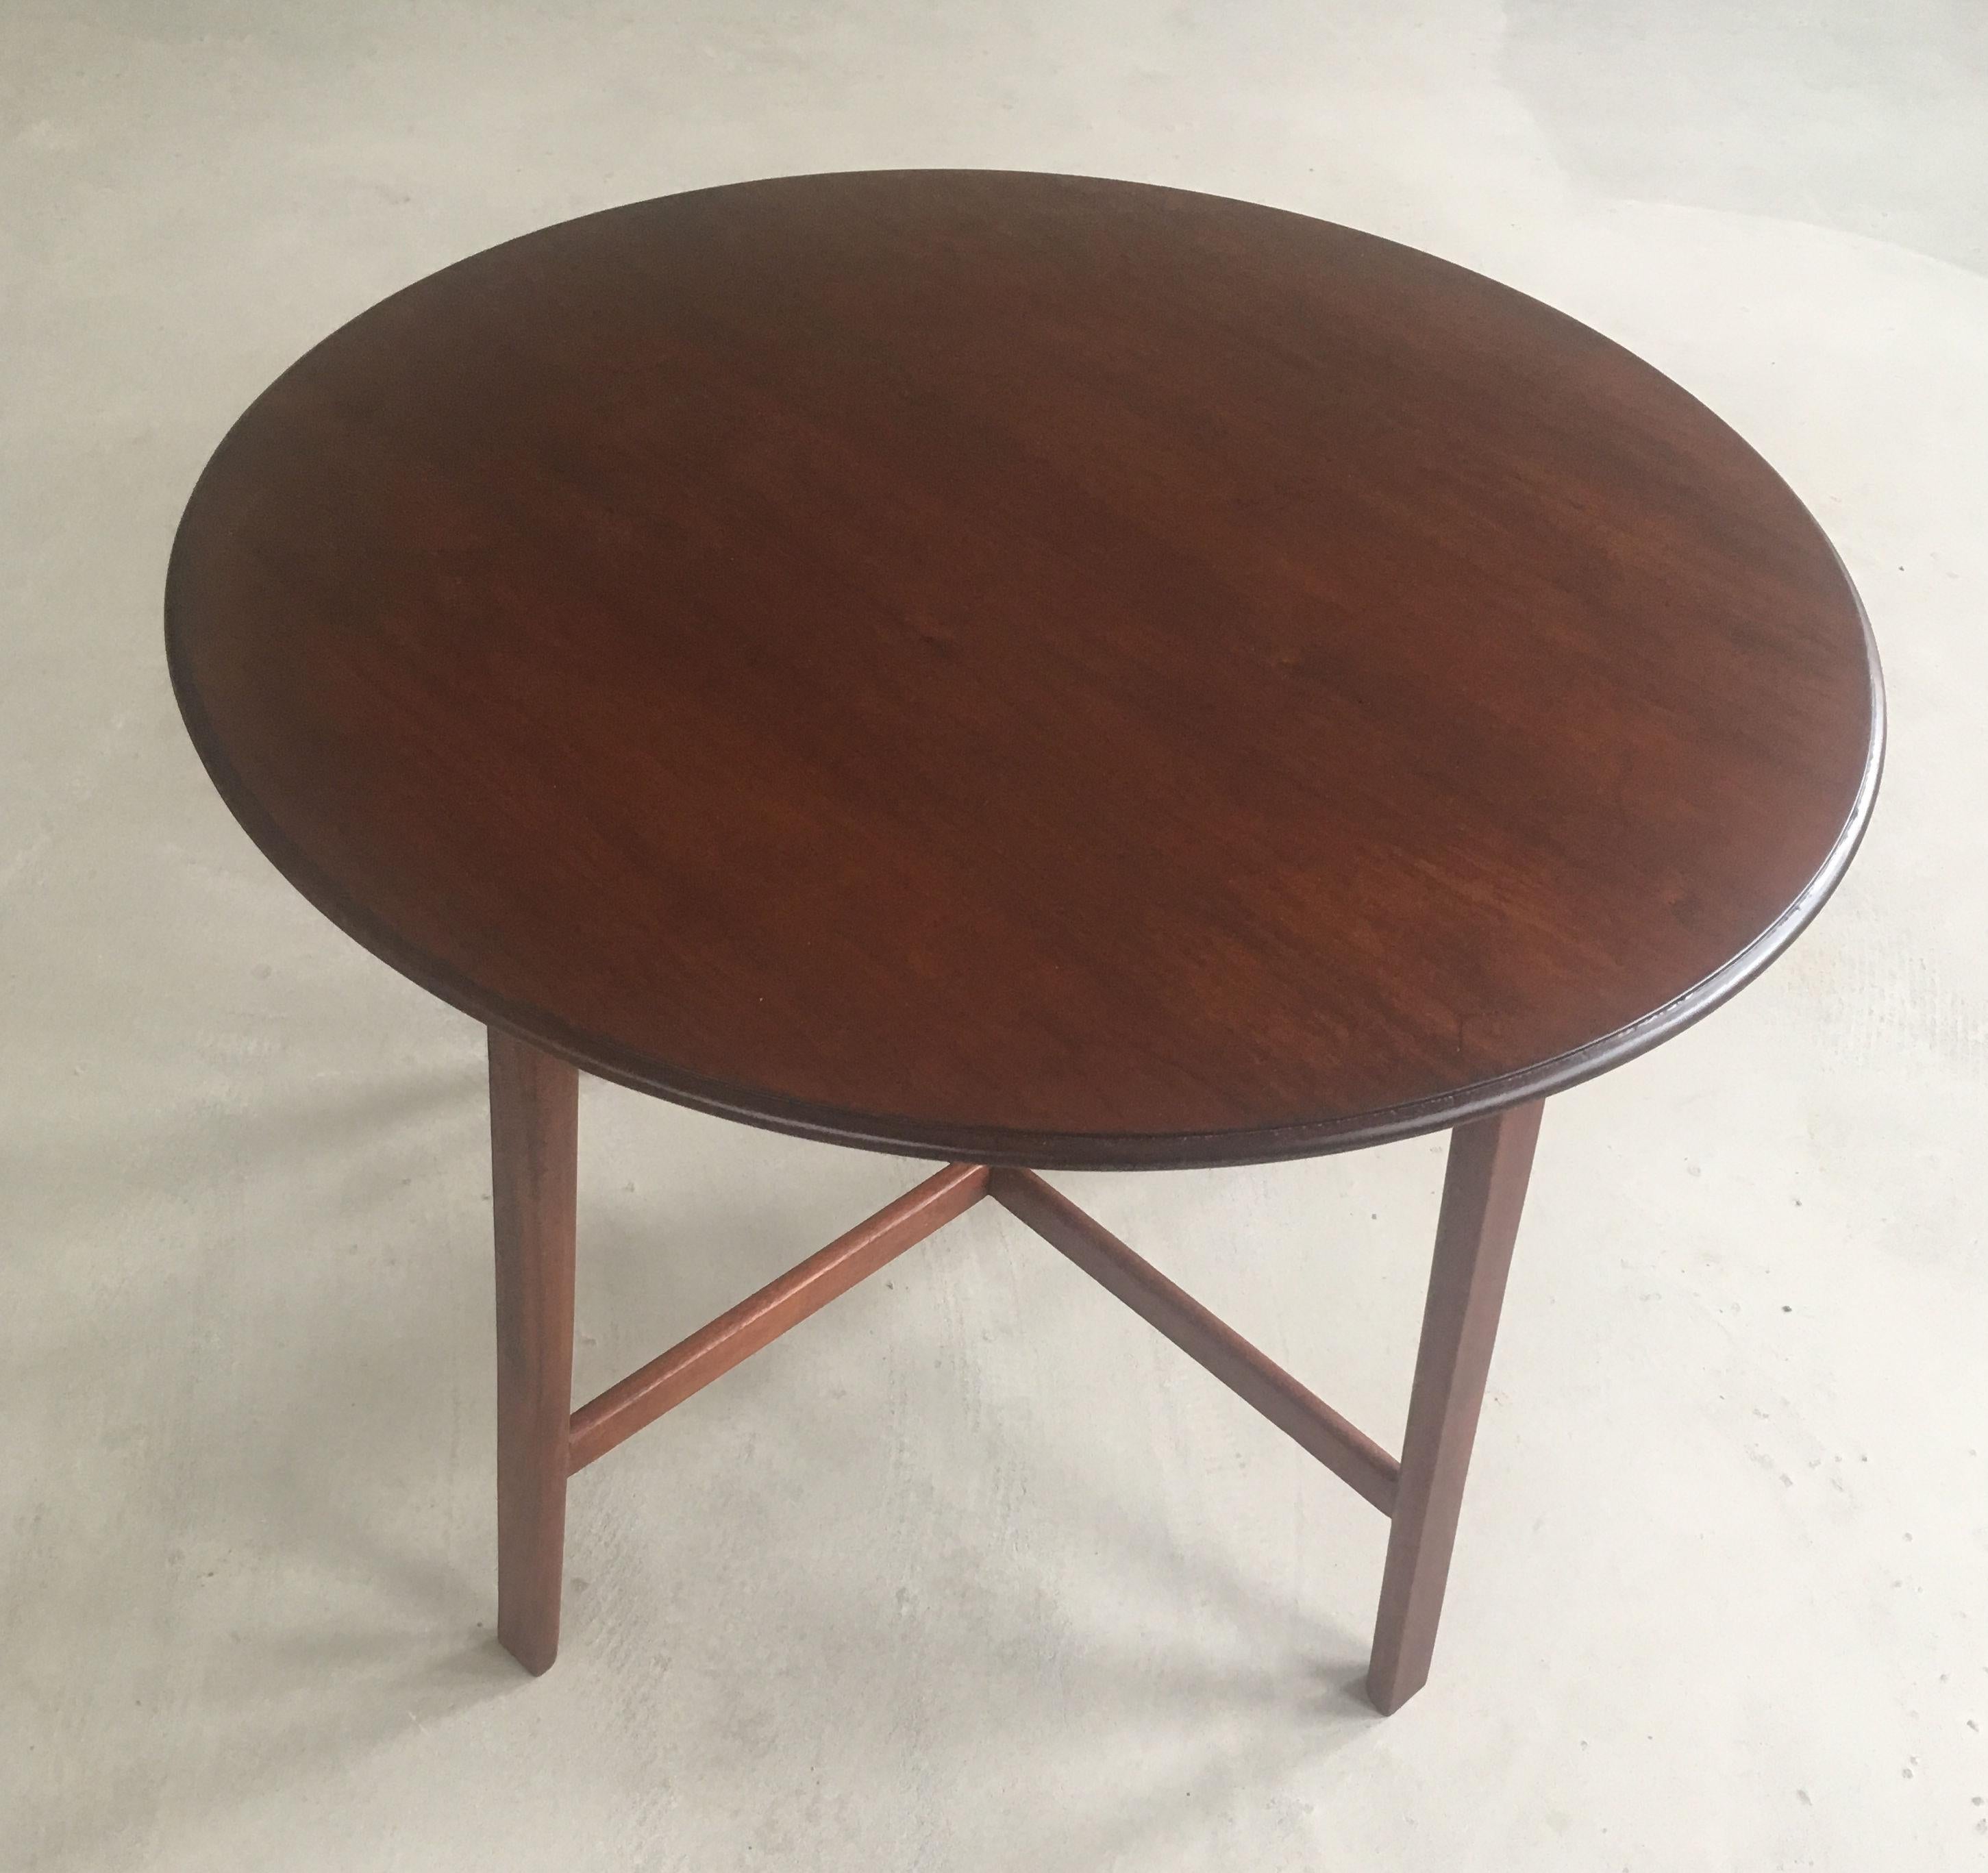 Restored Danish Art Deco teak side table from the 1930s

Beautifull round Danish sidetable in teak with small details like the half rounded legs, rounded edges.

The table has been restored and refinished with deep respect for the table by our